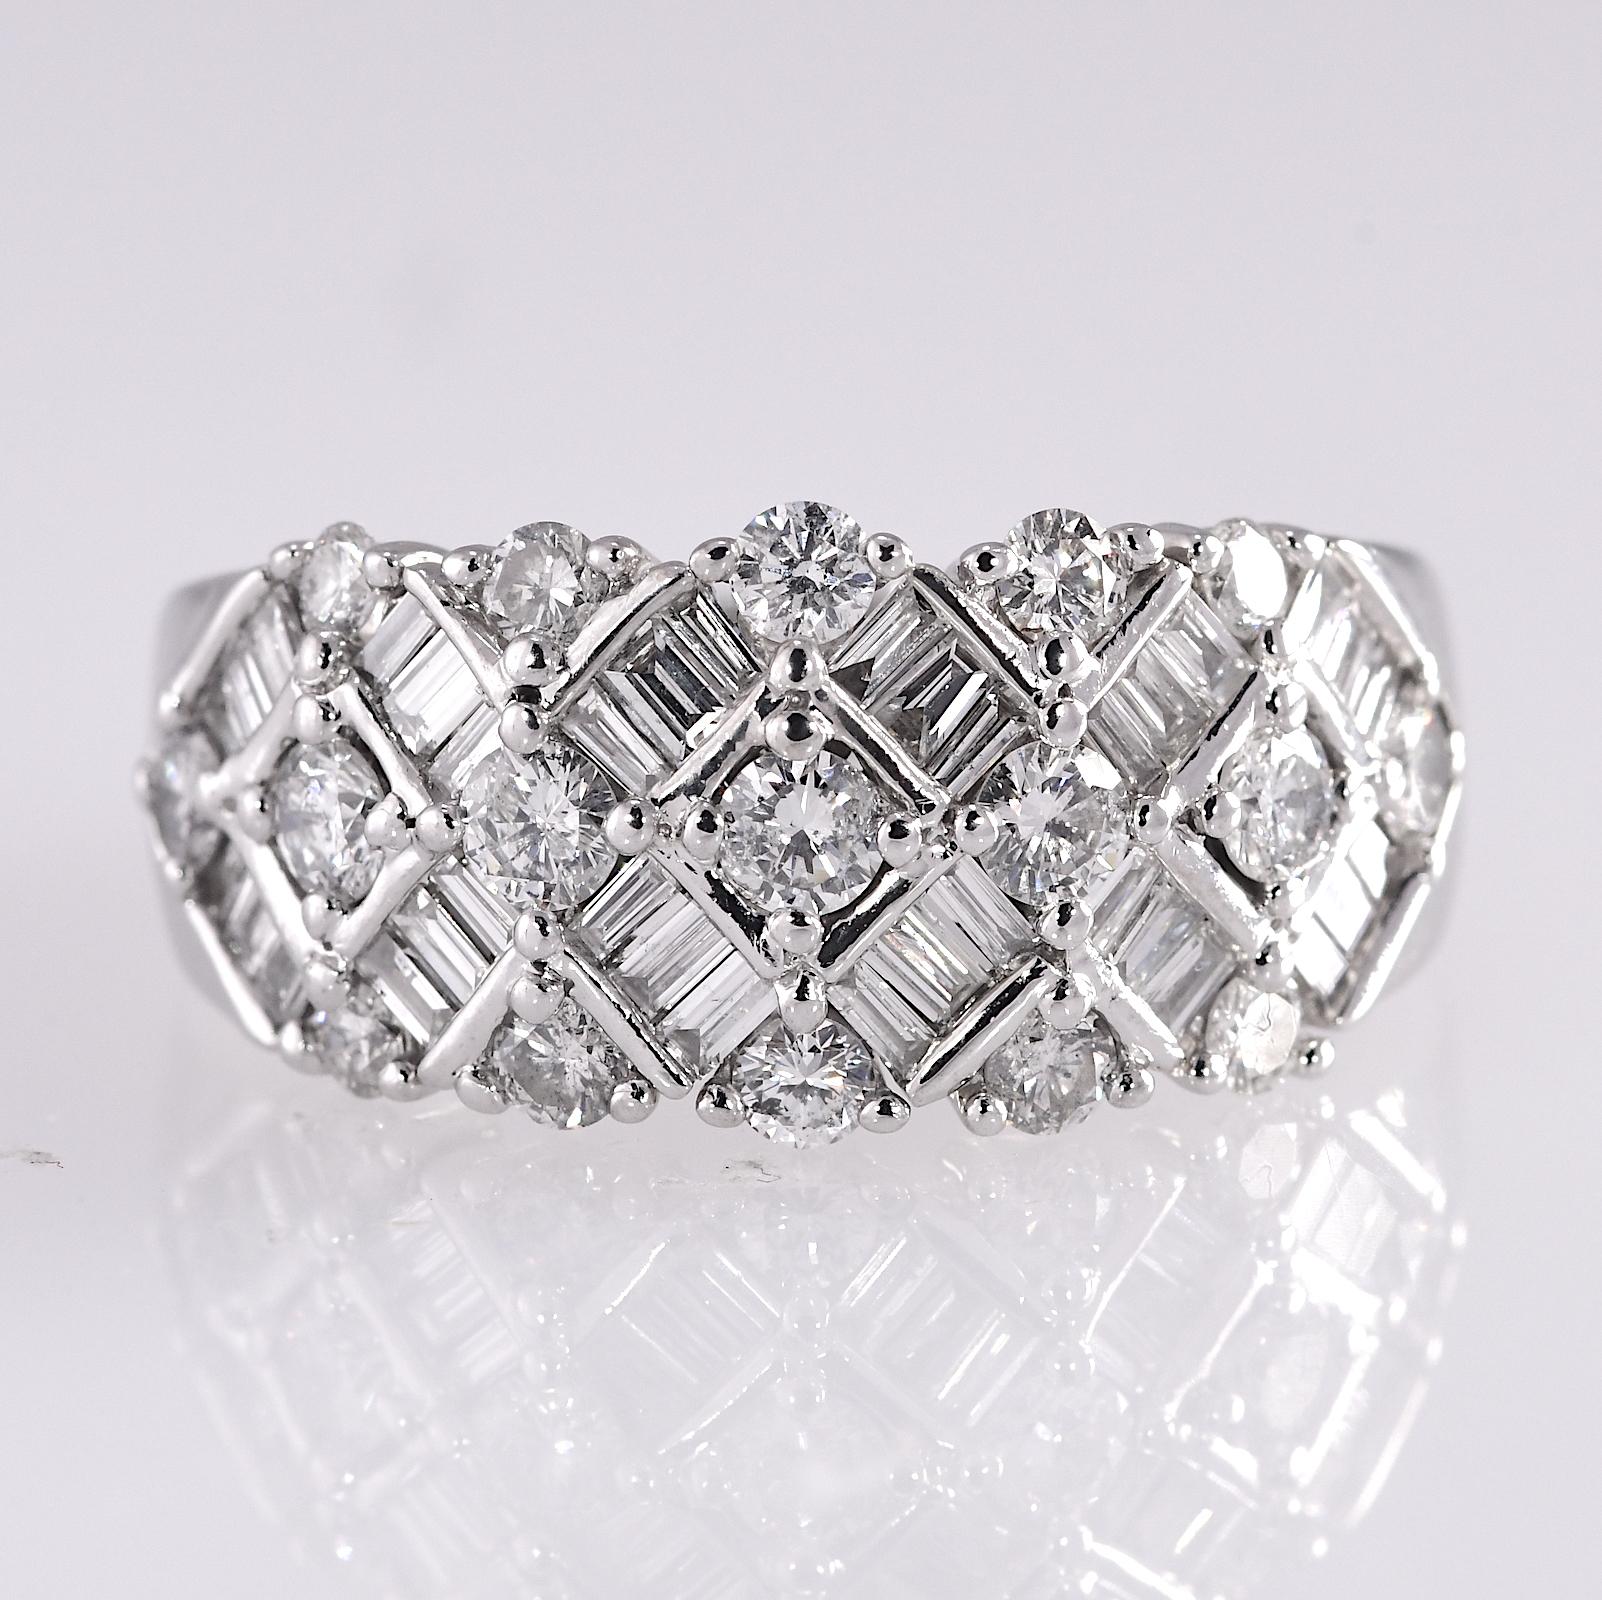 Alternating round and baguette diamonds set in a 14 karat white gold wide band. The total carat weight of the geometric design ring is 2.0 carat. 
The diamond quality is SI1-I2 H-J . The ring measures 7/16 inch long and 1 inch wide. The height is